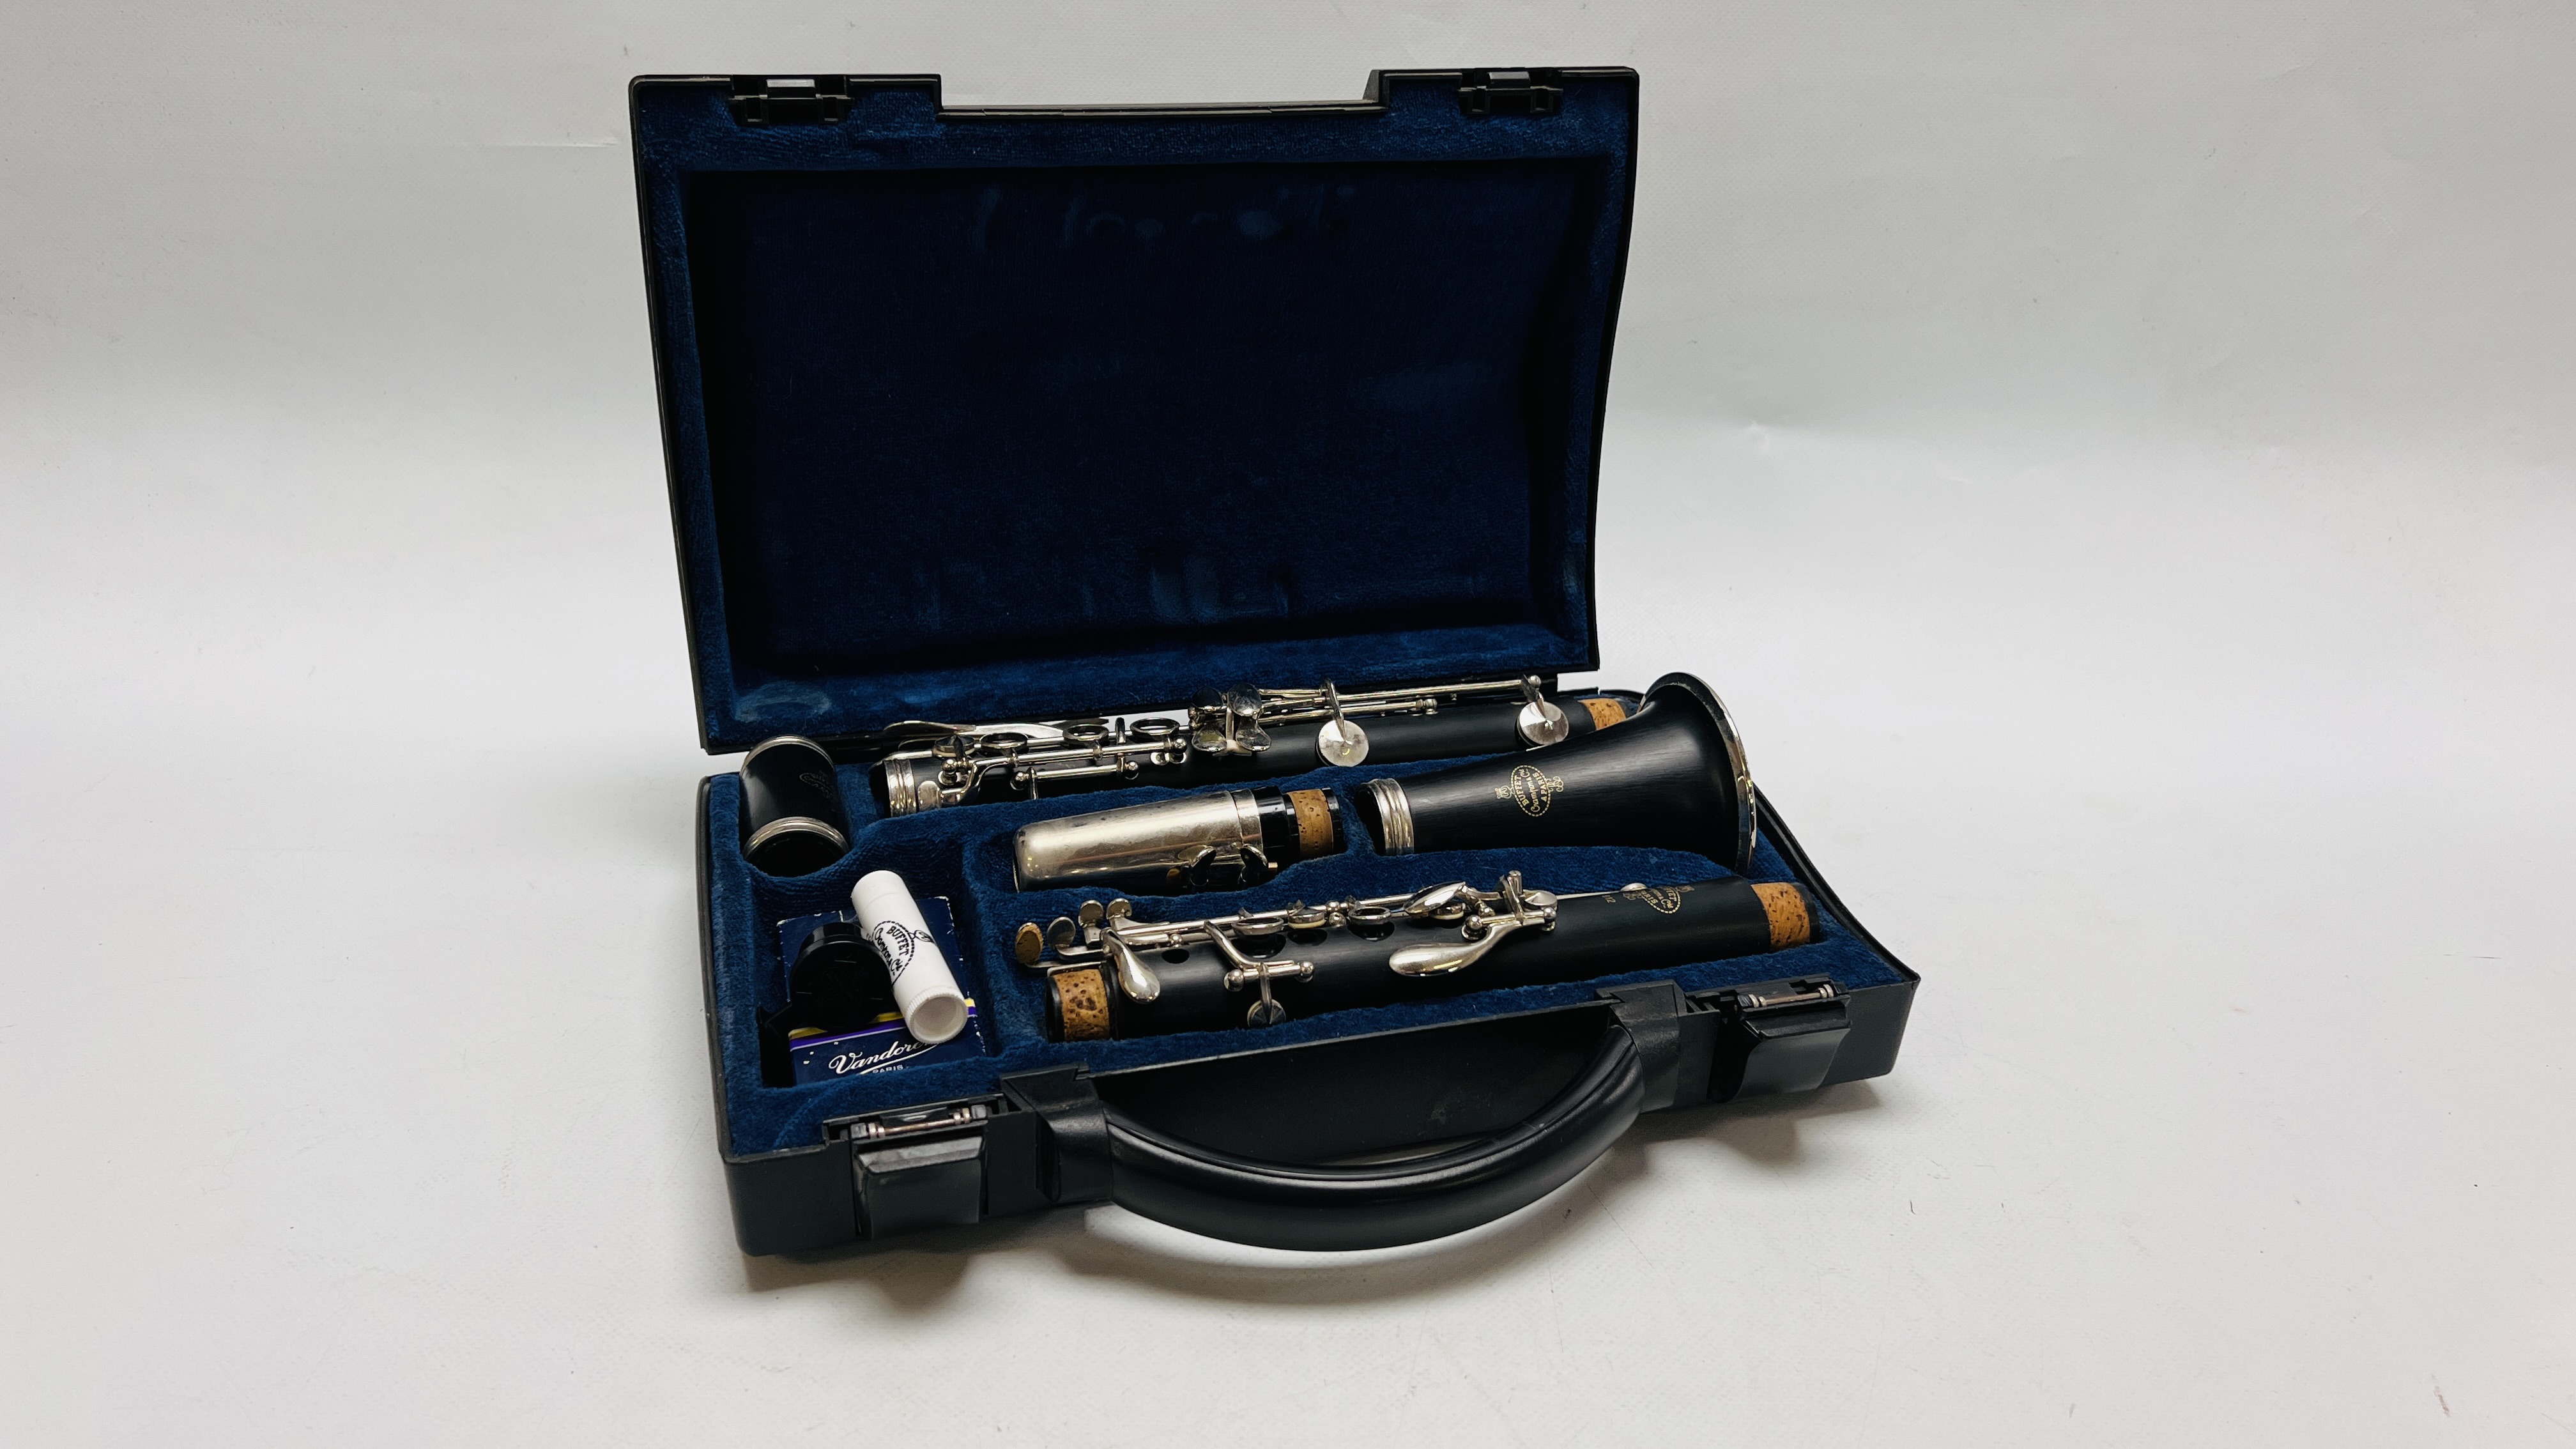 A BUFFET CRAMPON AND CIE B12 CLARINET IN FITTED HARDCASE